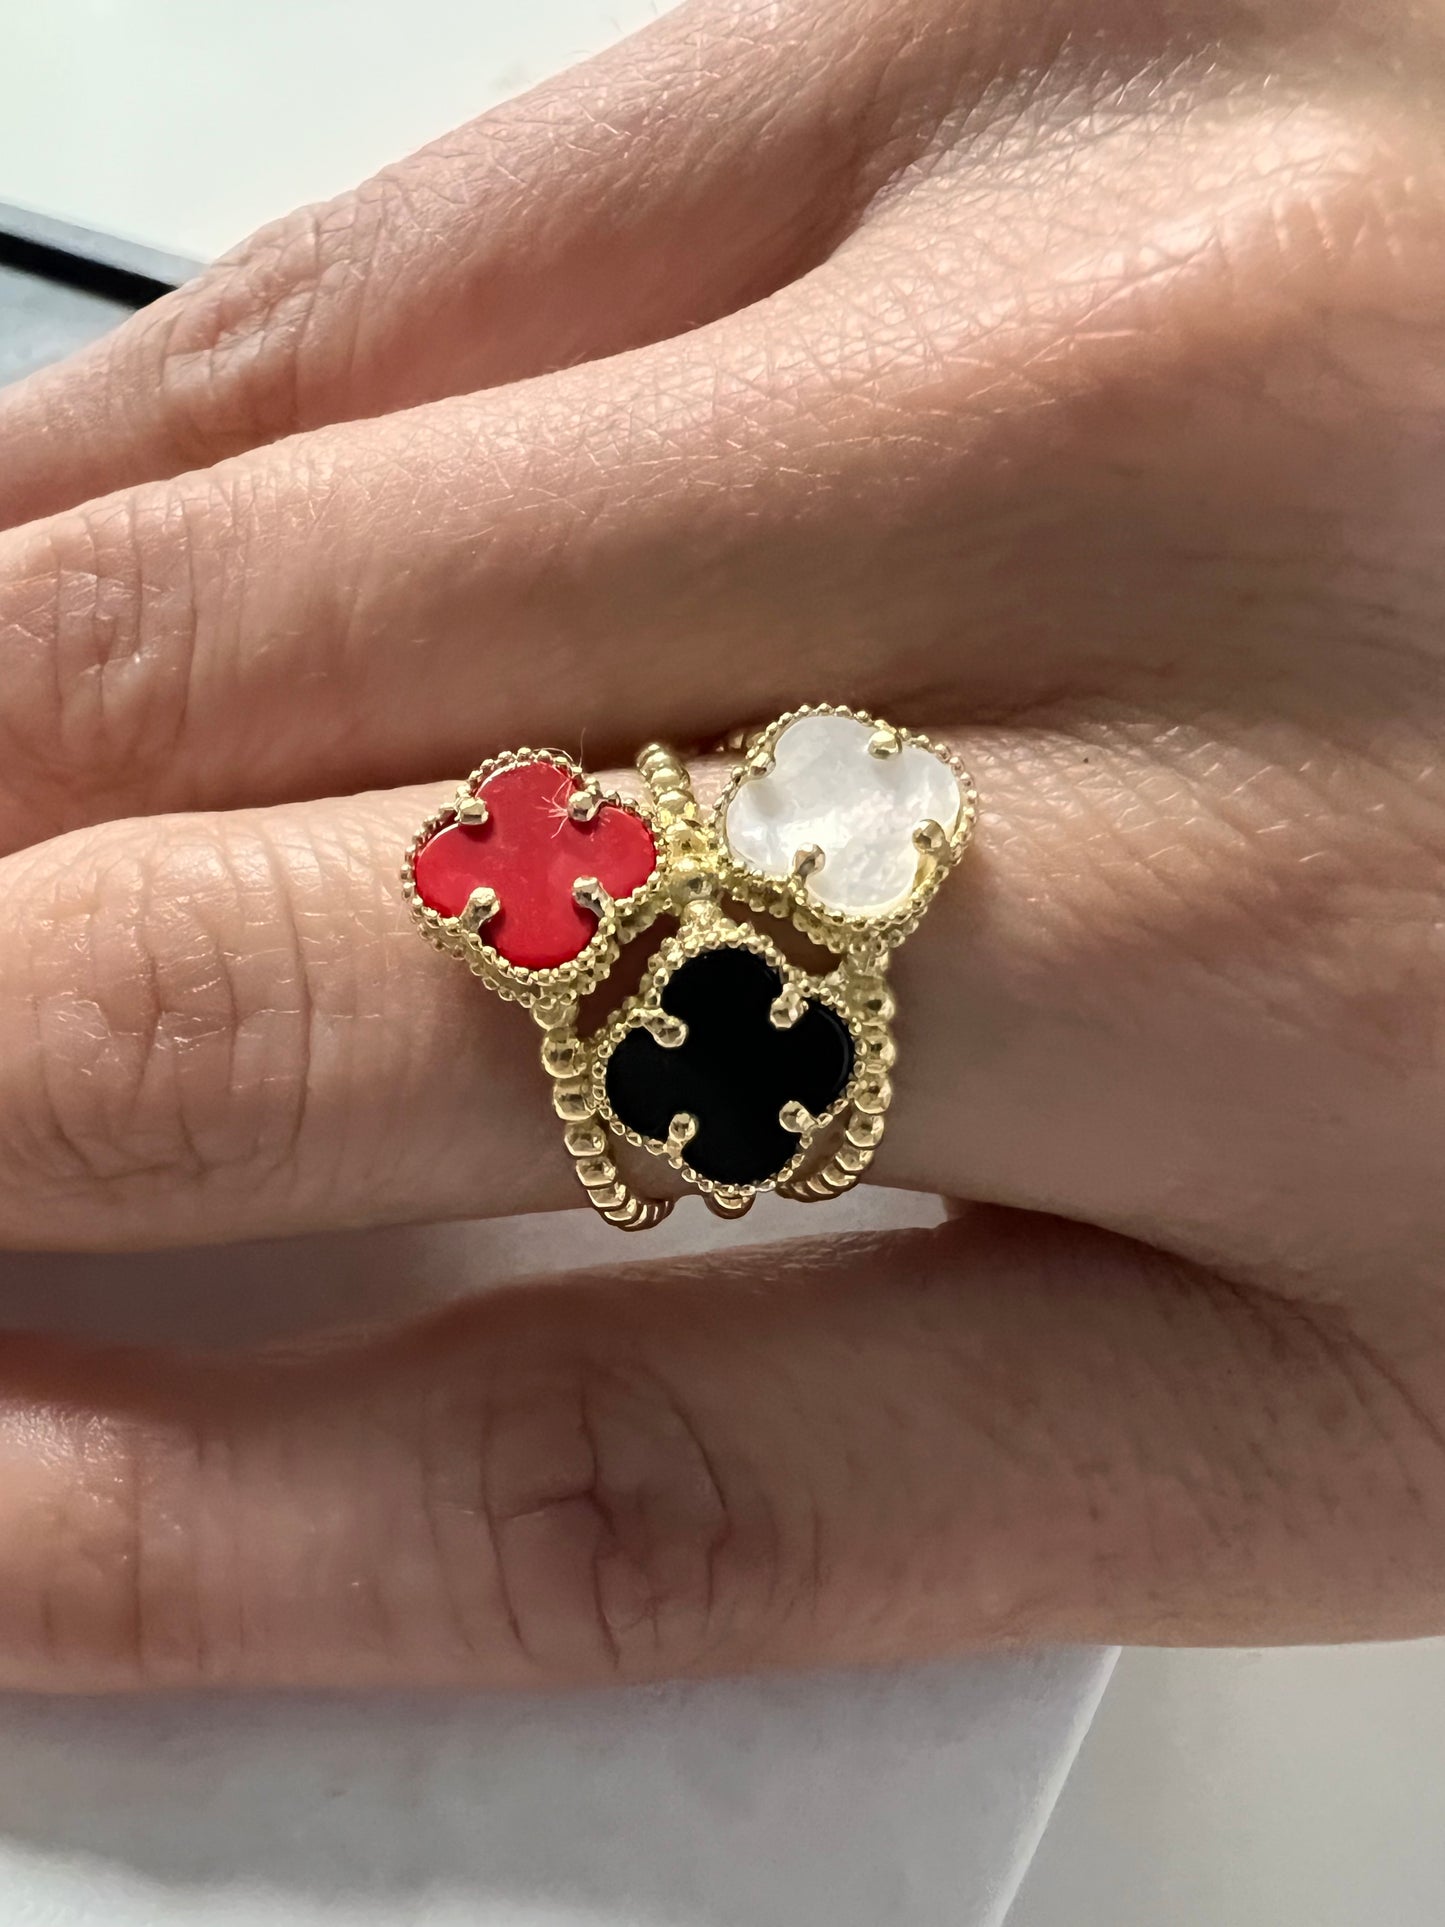 14K Yellow gold multi color clover ring-227063